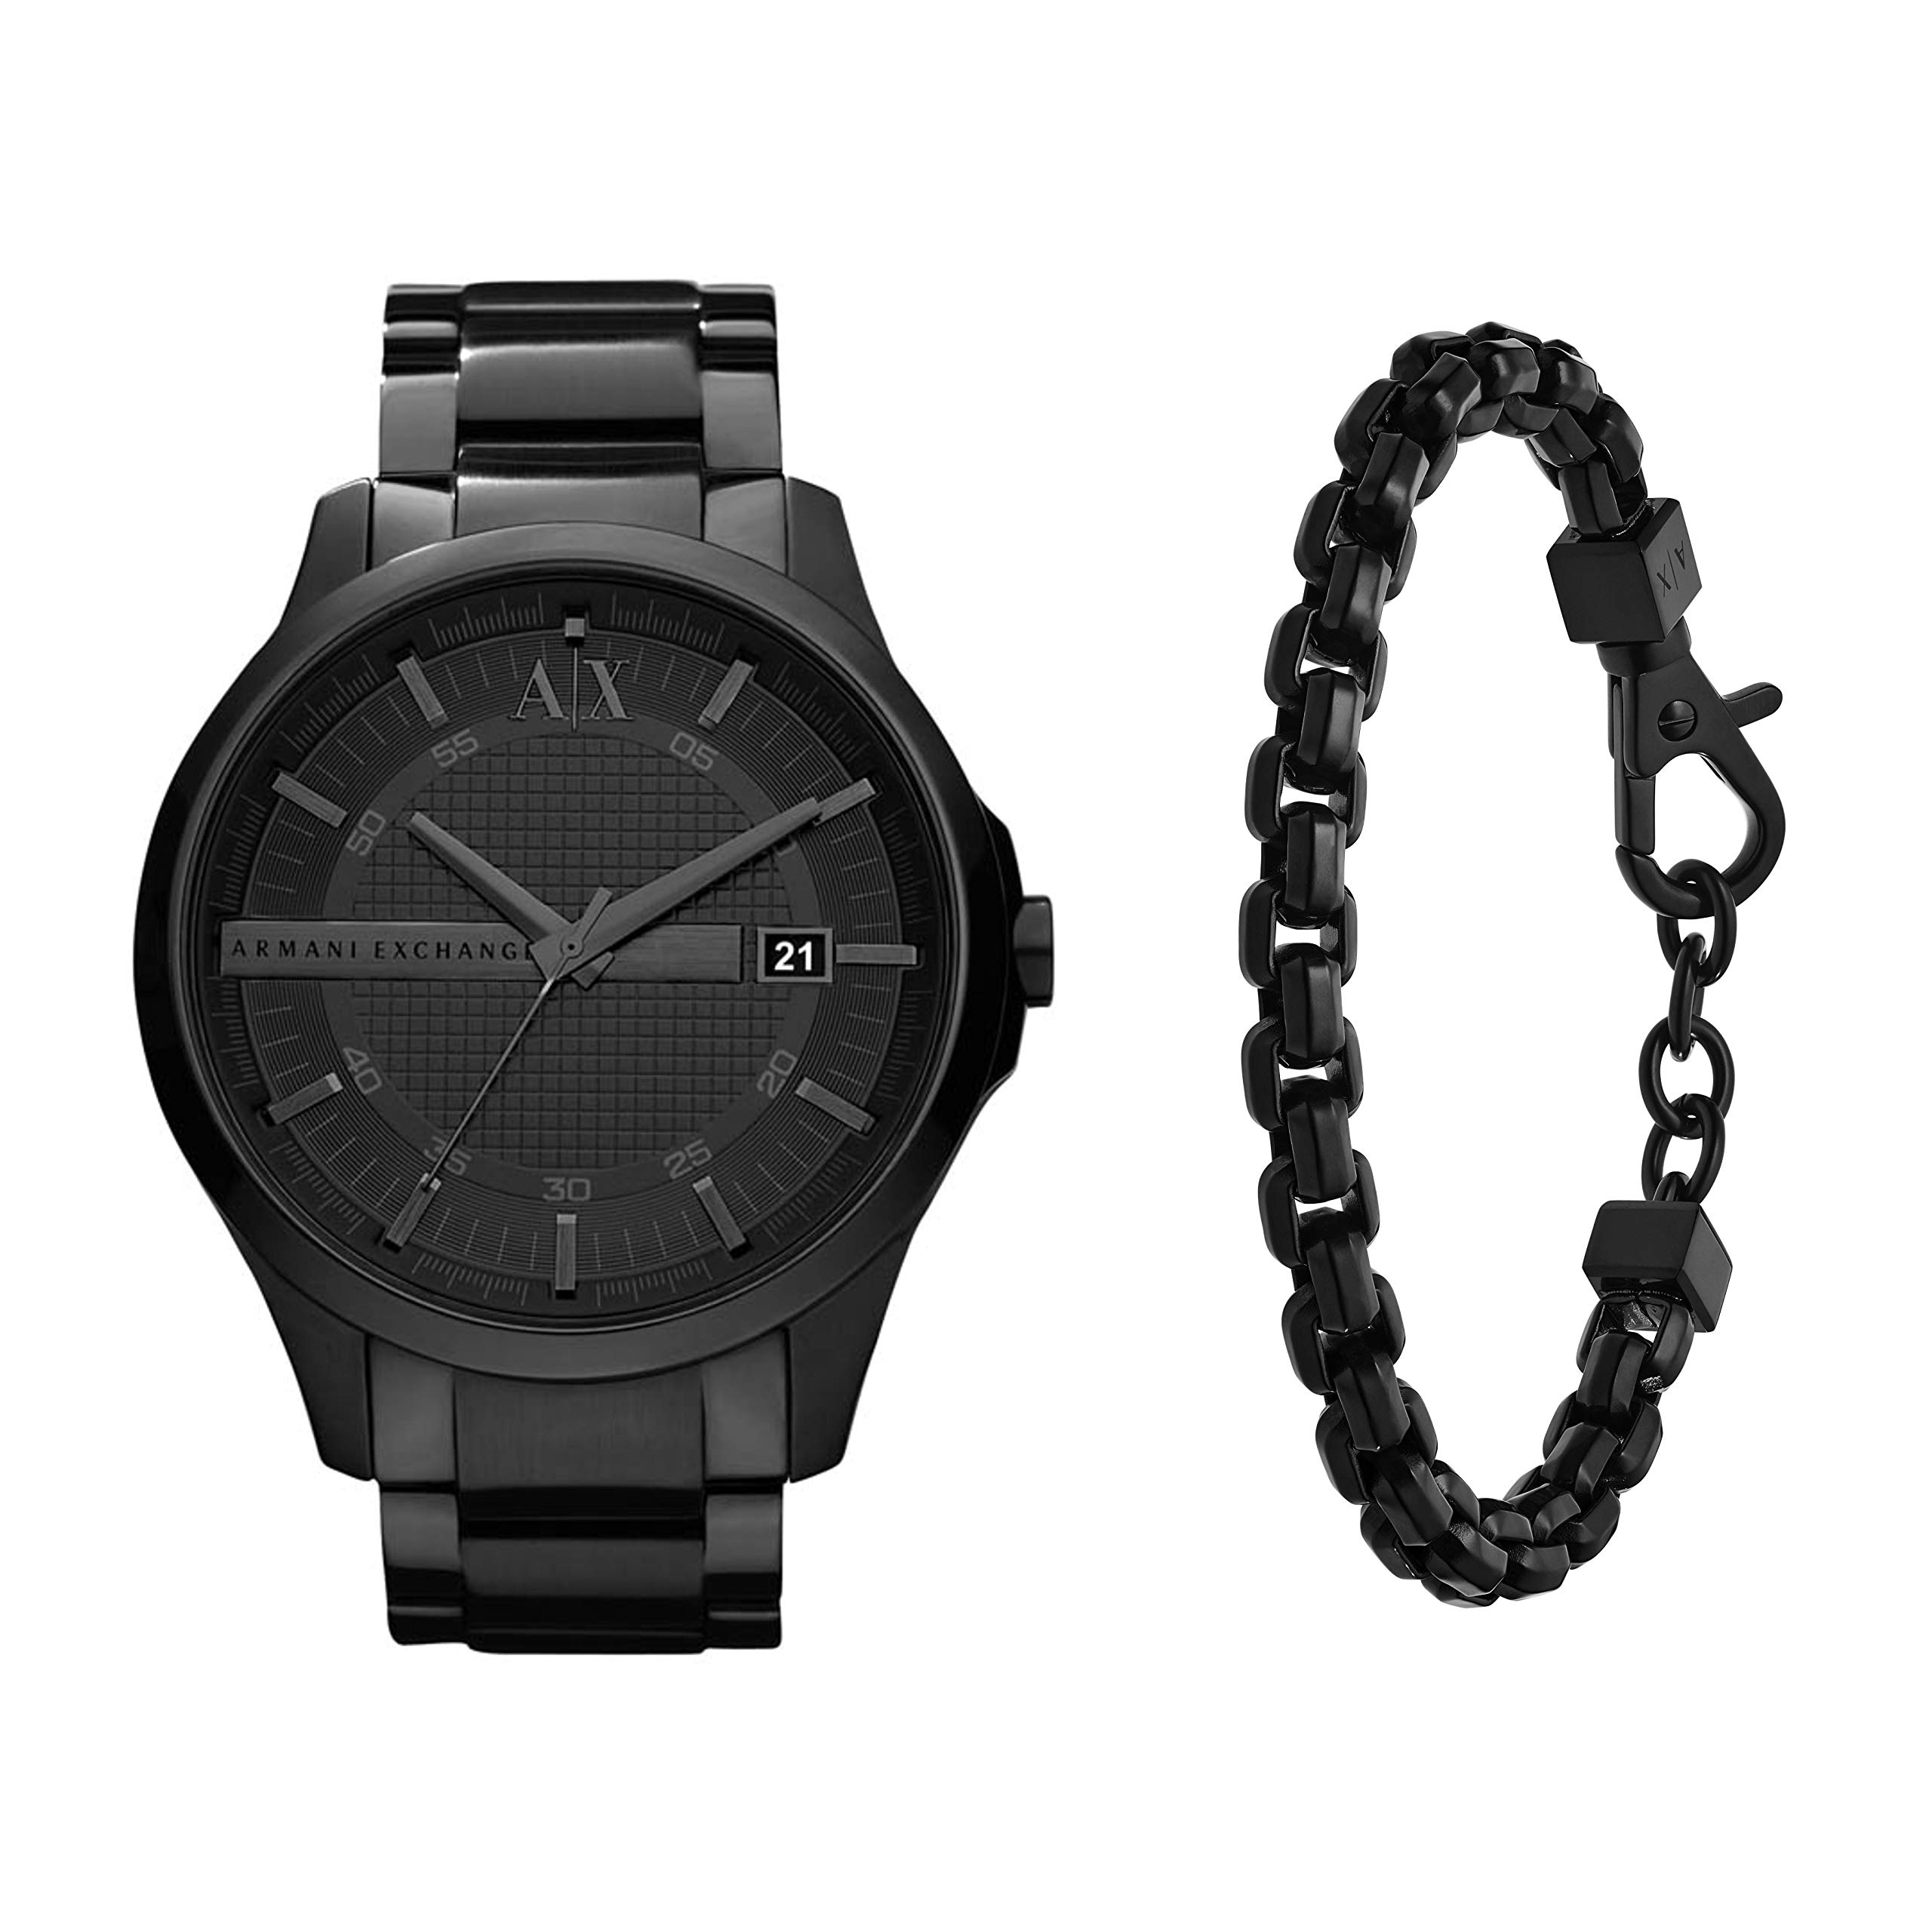 Armani Exchange Mens AX2104 Watch with Stainless Steel Chain Bracelet Black並行輸入品